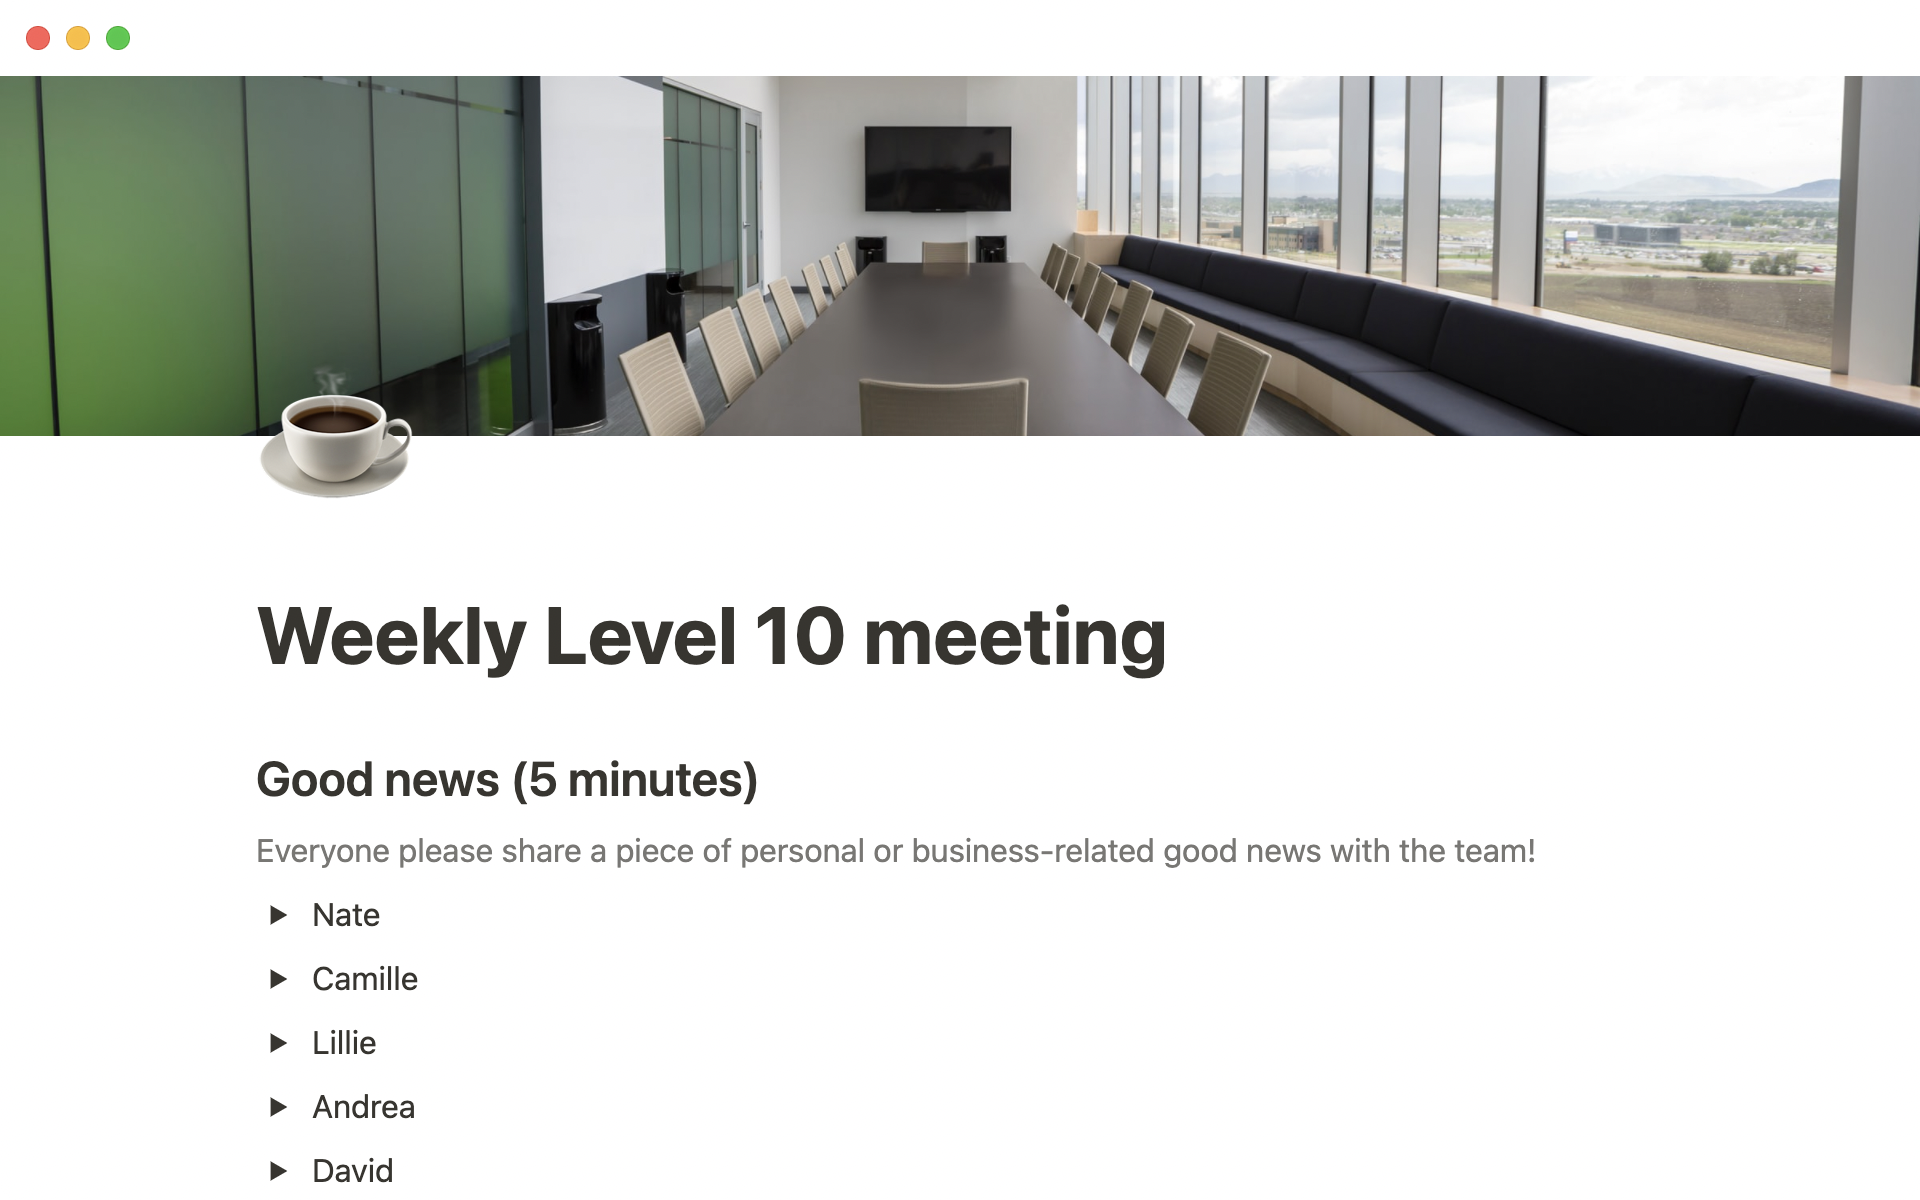 notion-template-gallery-weekly-level-10-meeting